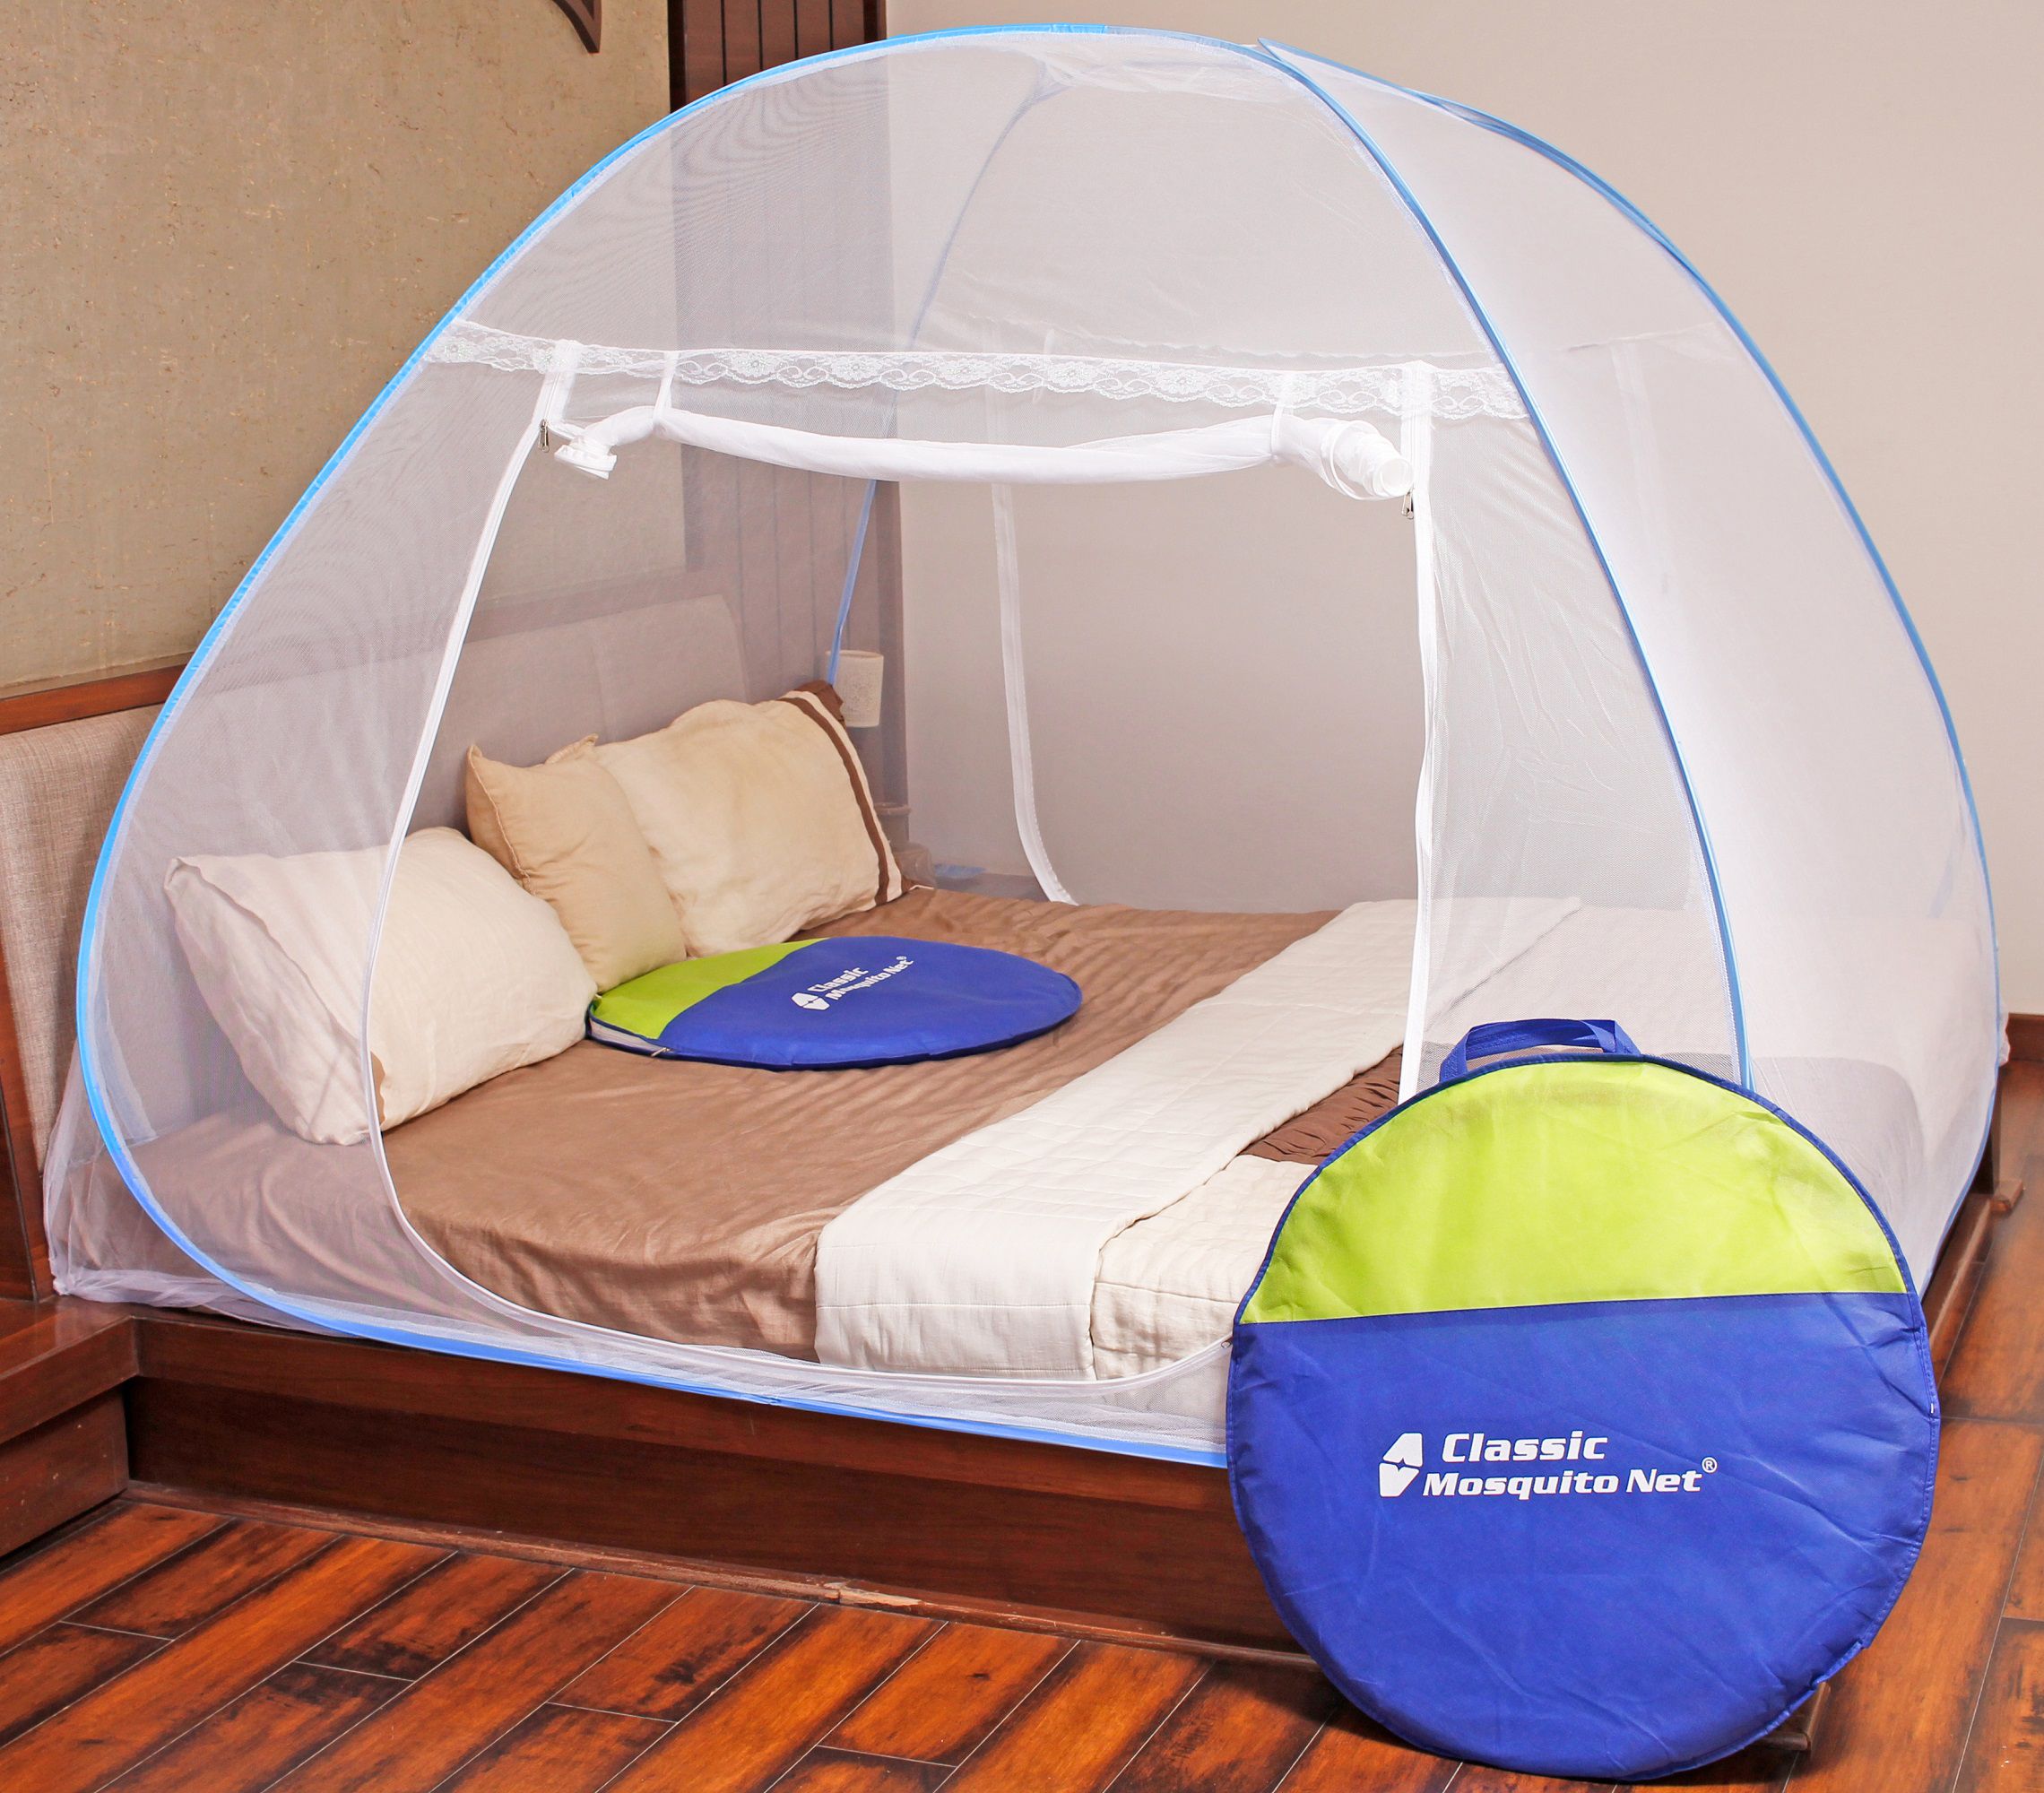 mosquito nets online shopping